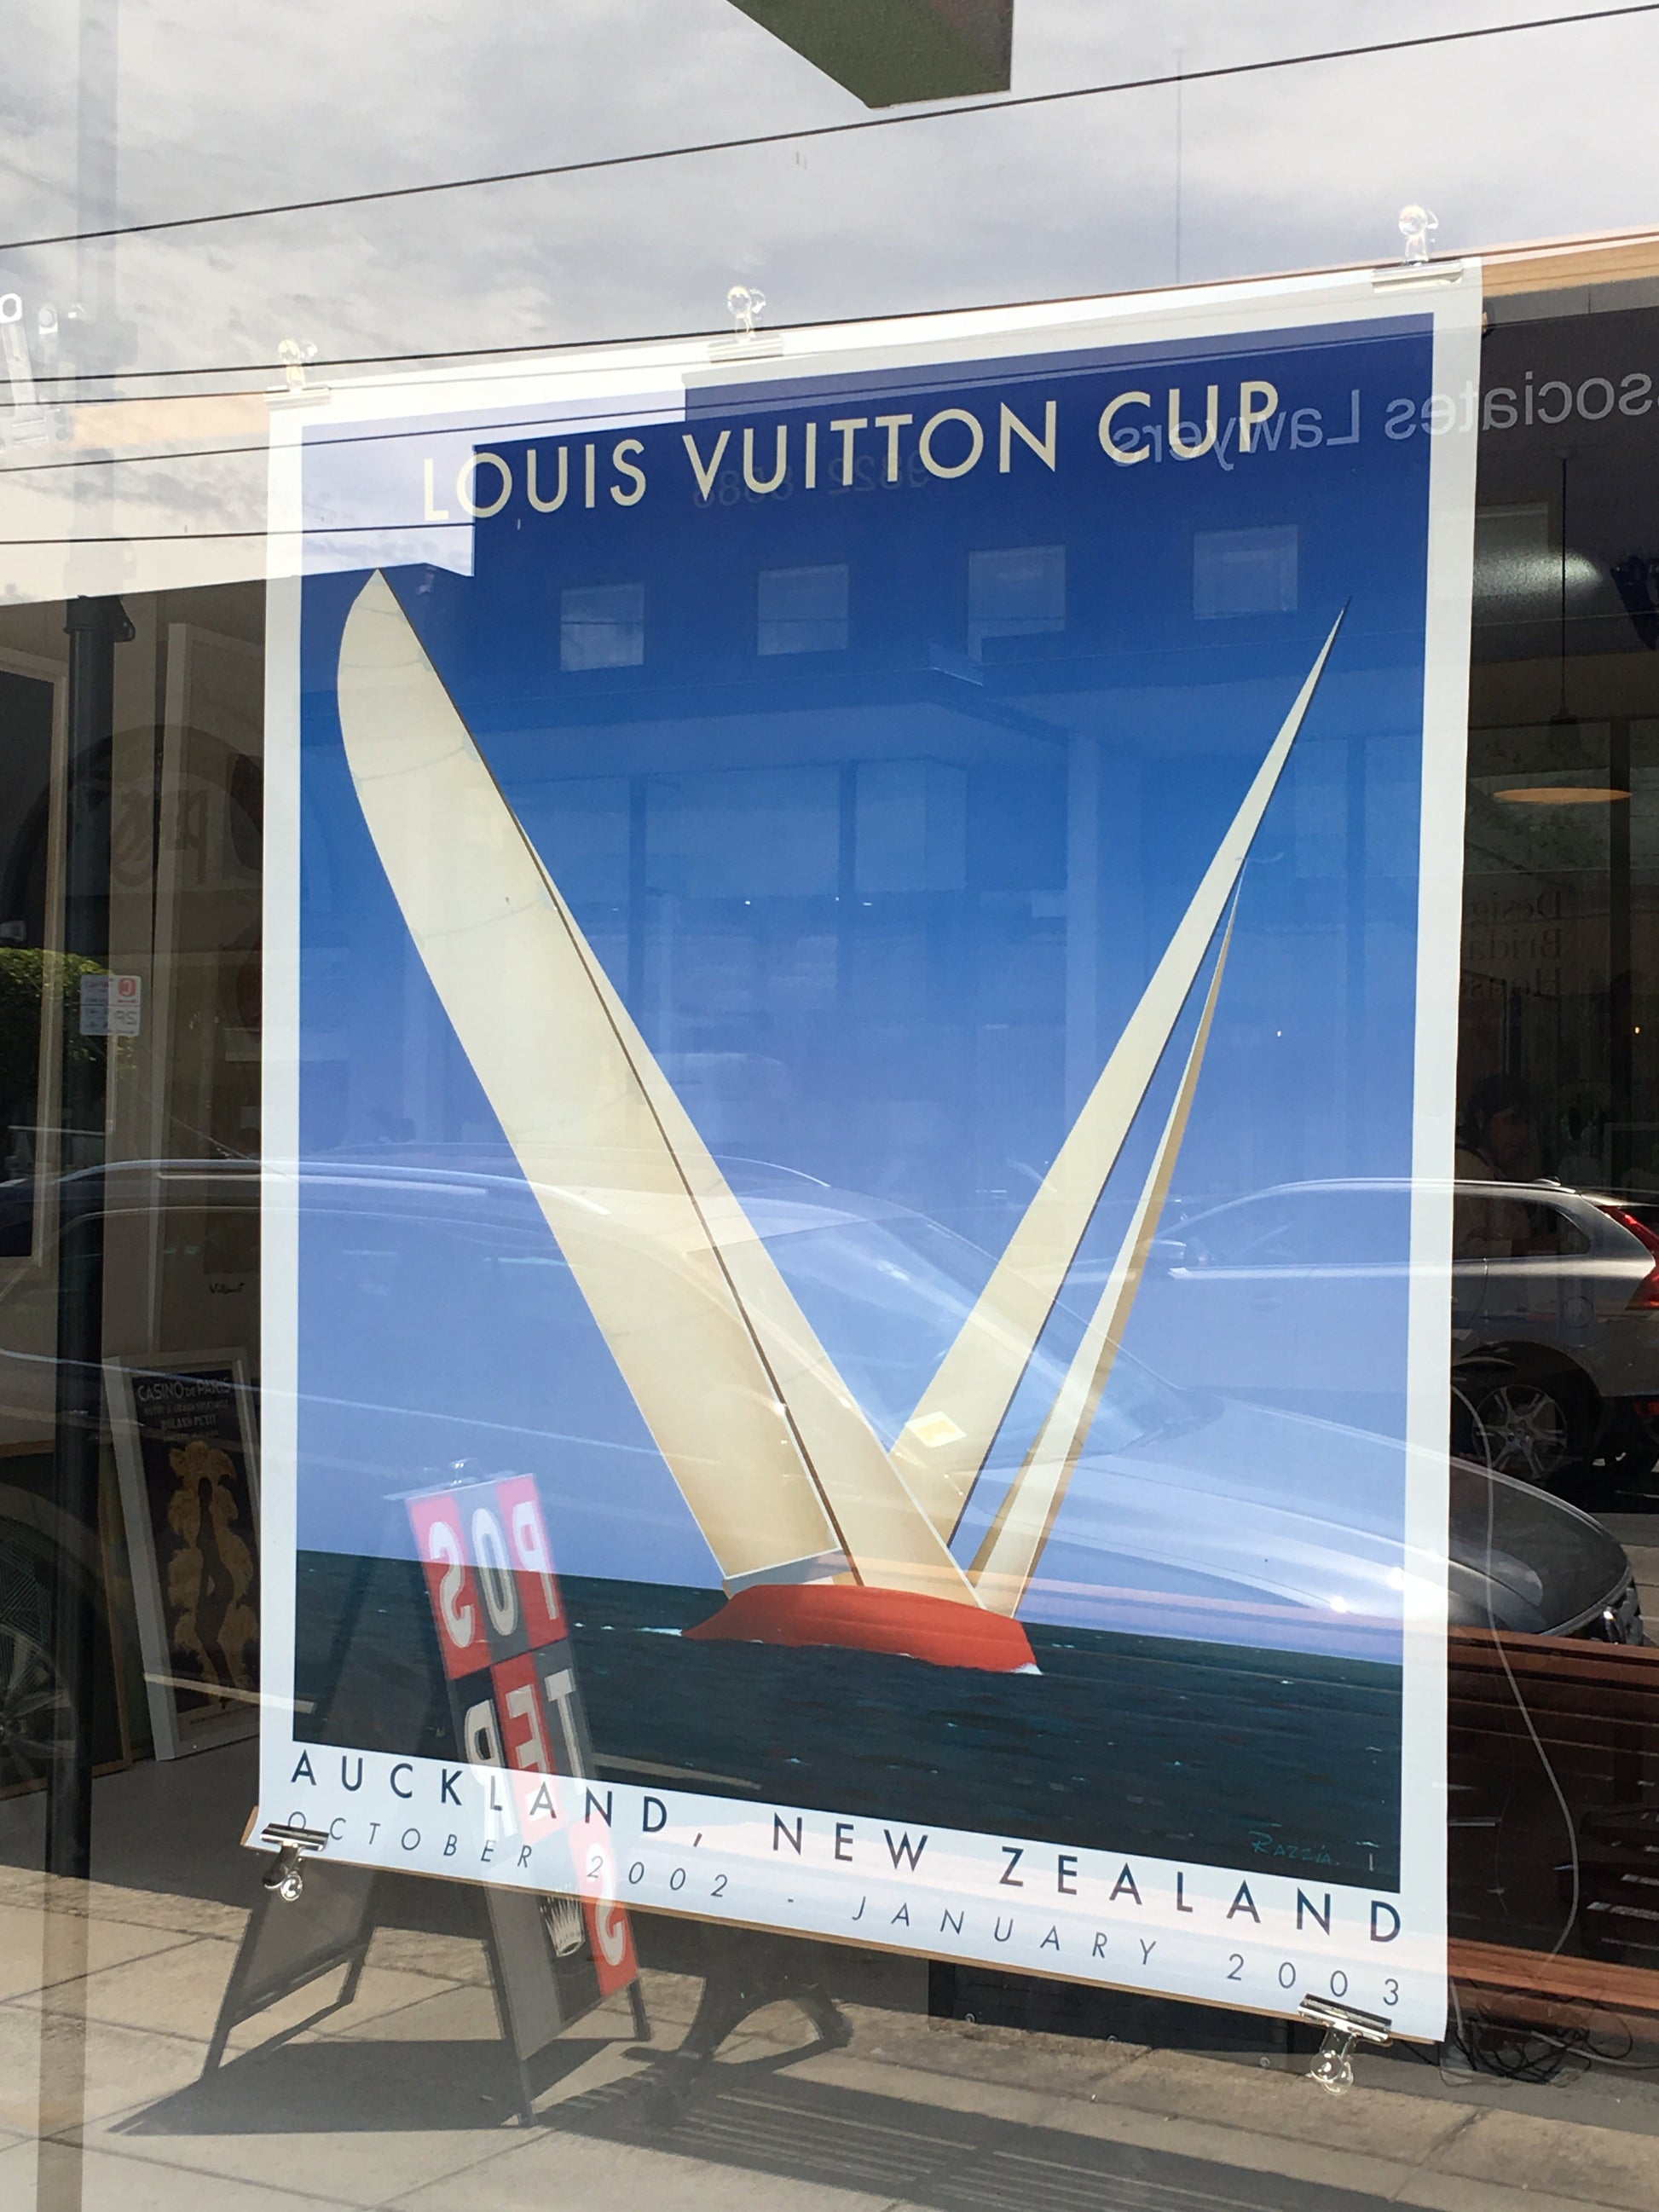 Other, Louis Vuitton Cup Poster